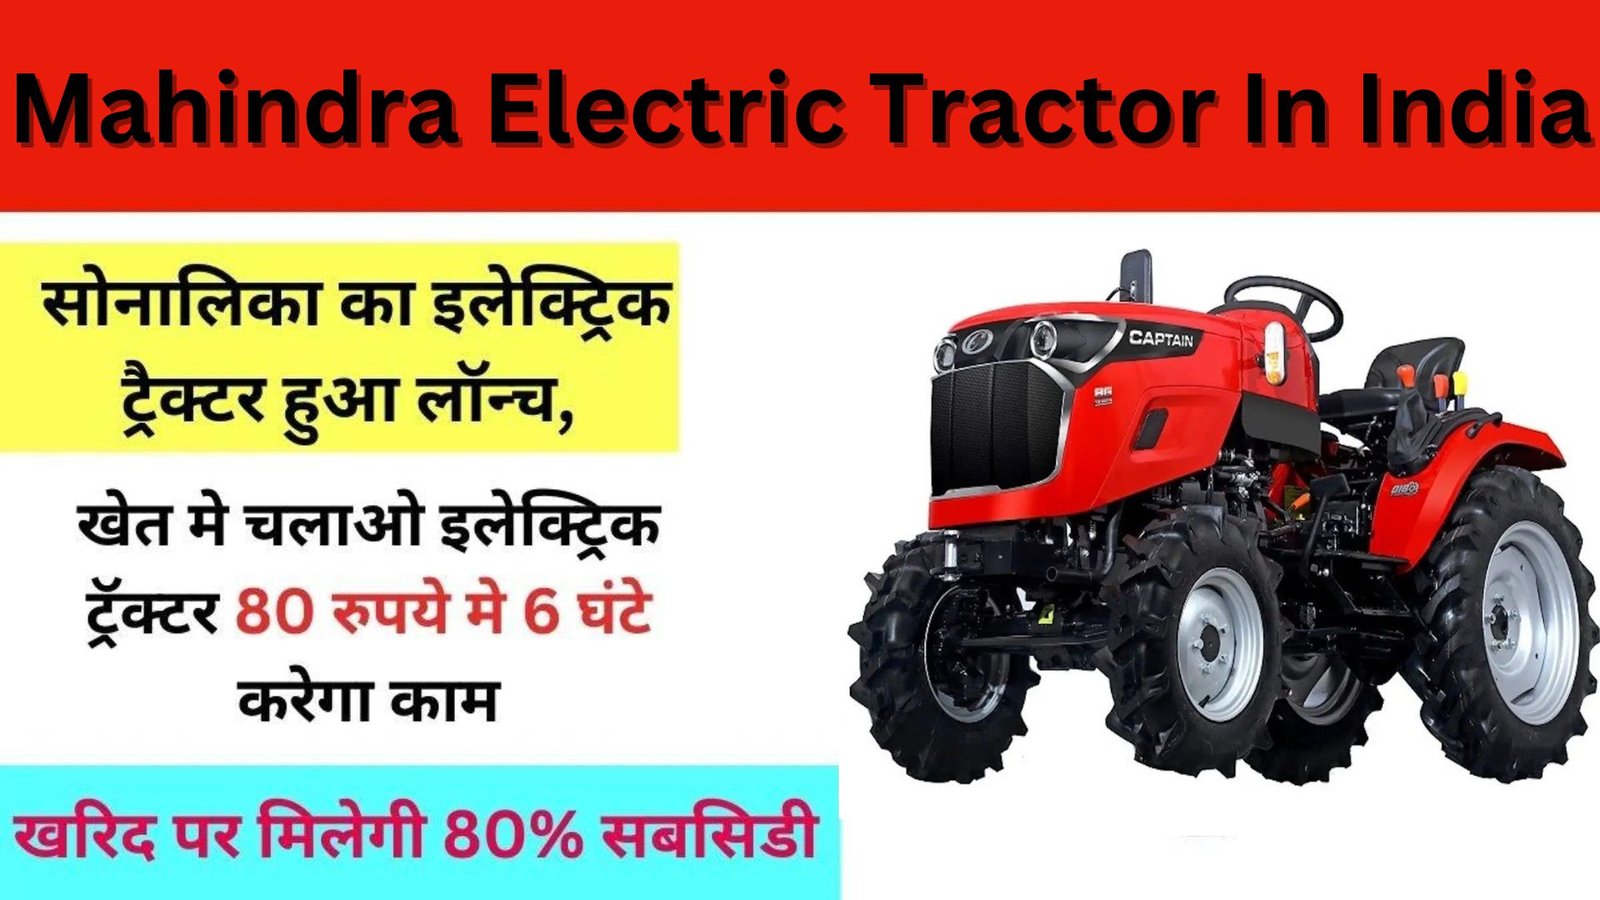 Mahindra Electric Tractor In India